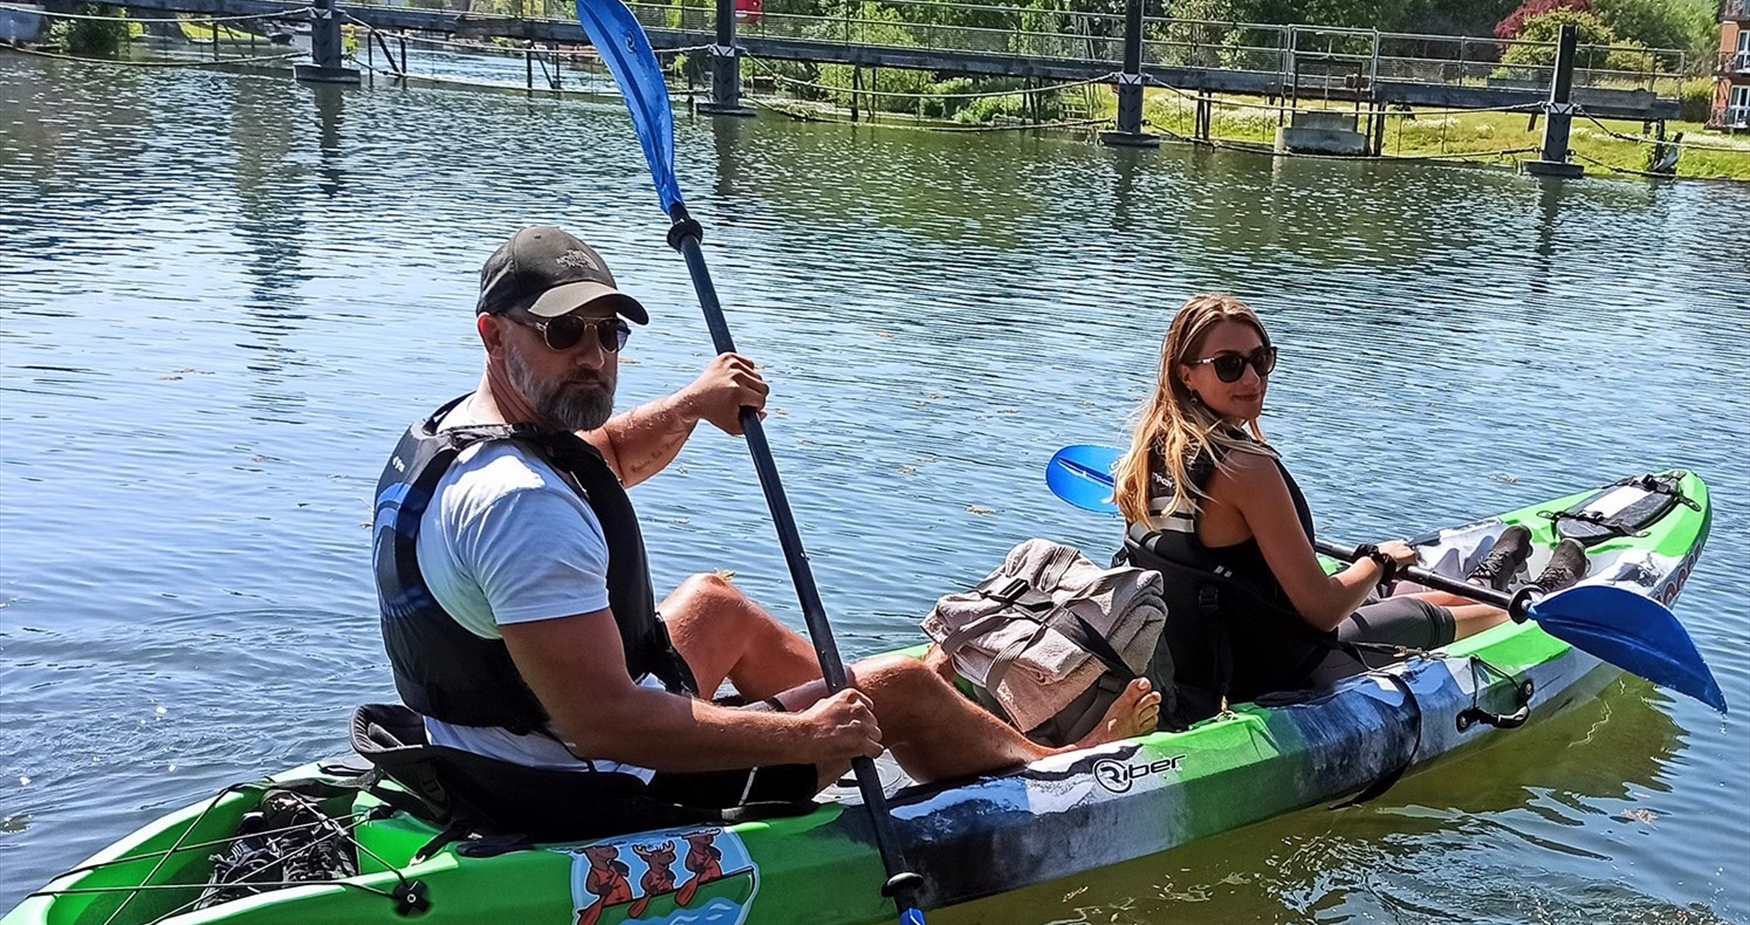 Couple in Double-Canadian Canoe from Boat Rental Thames, Bisham